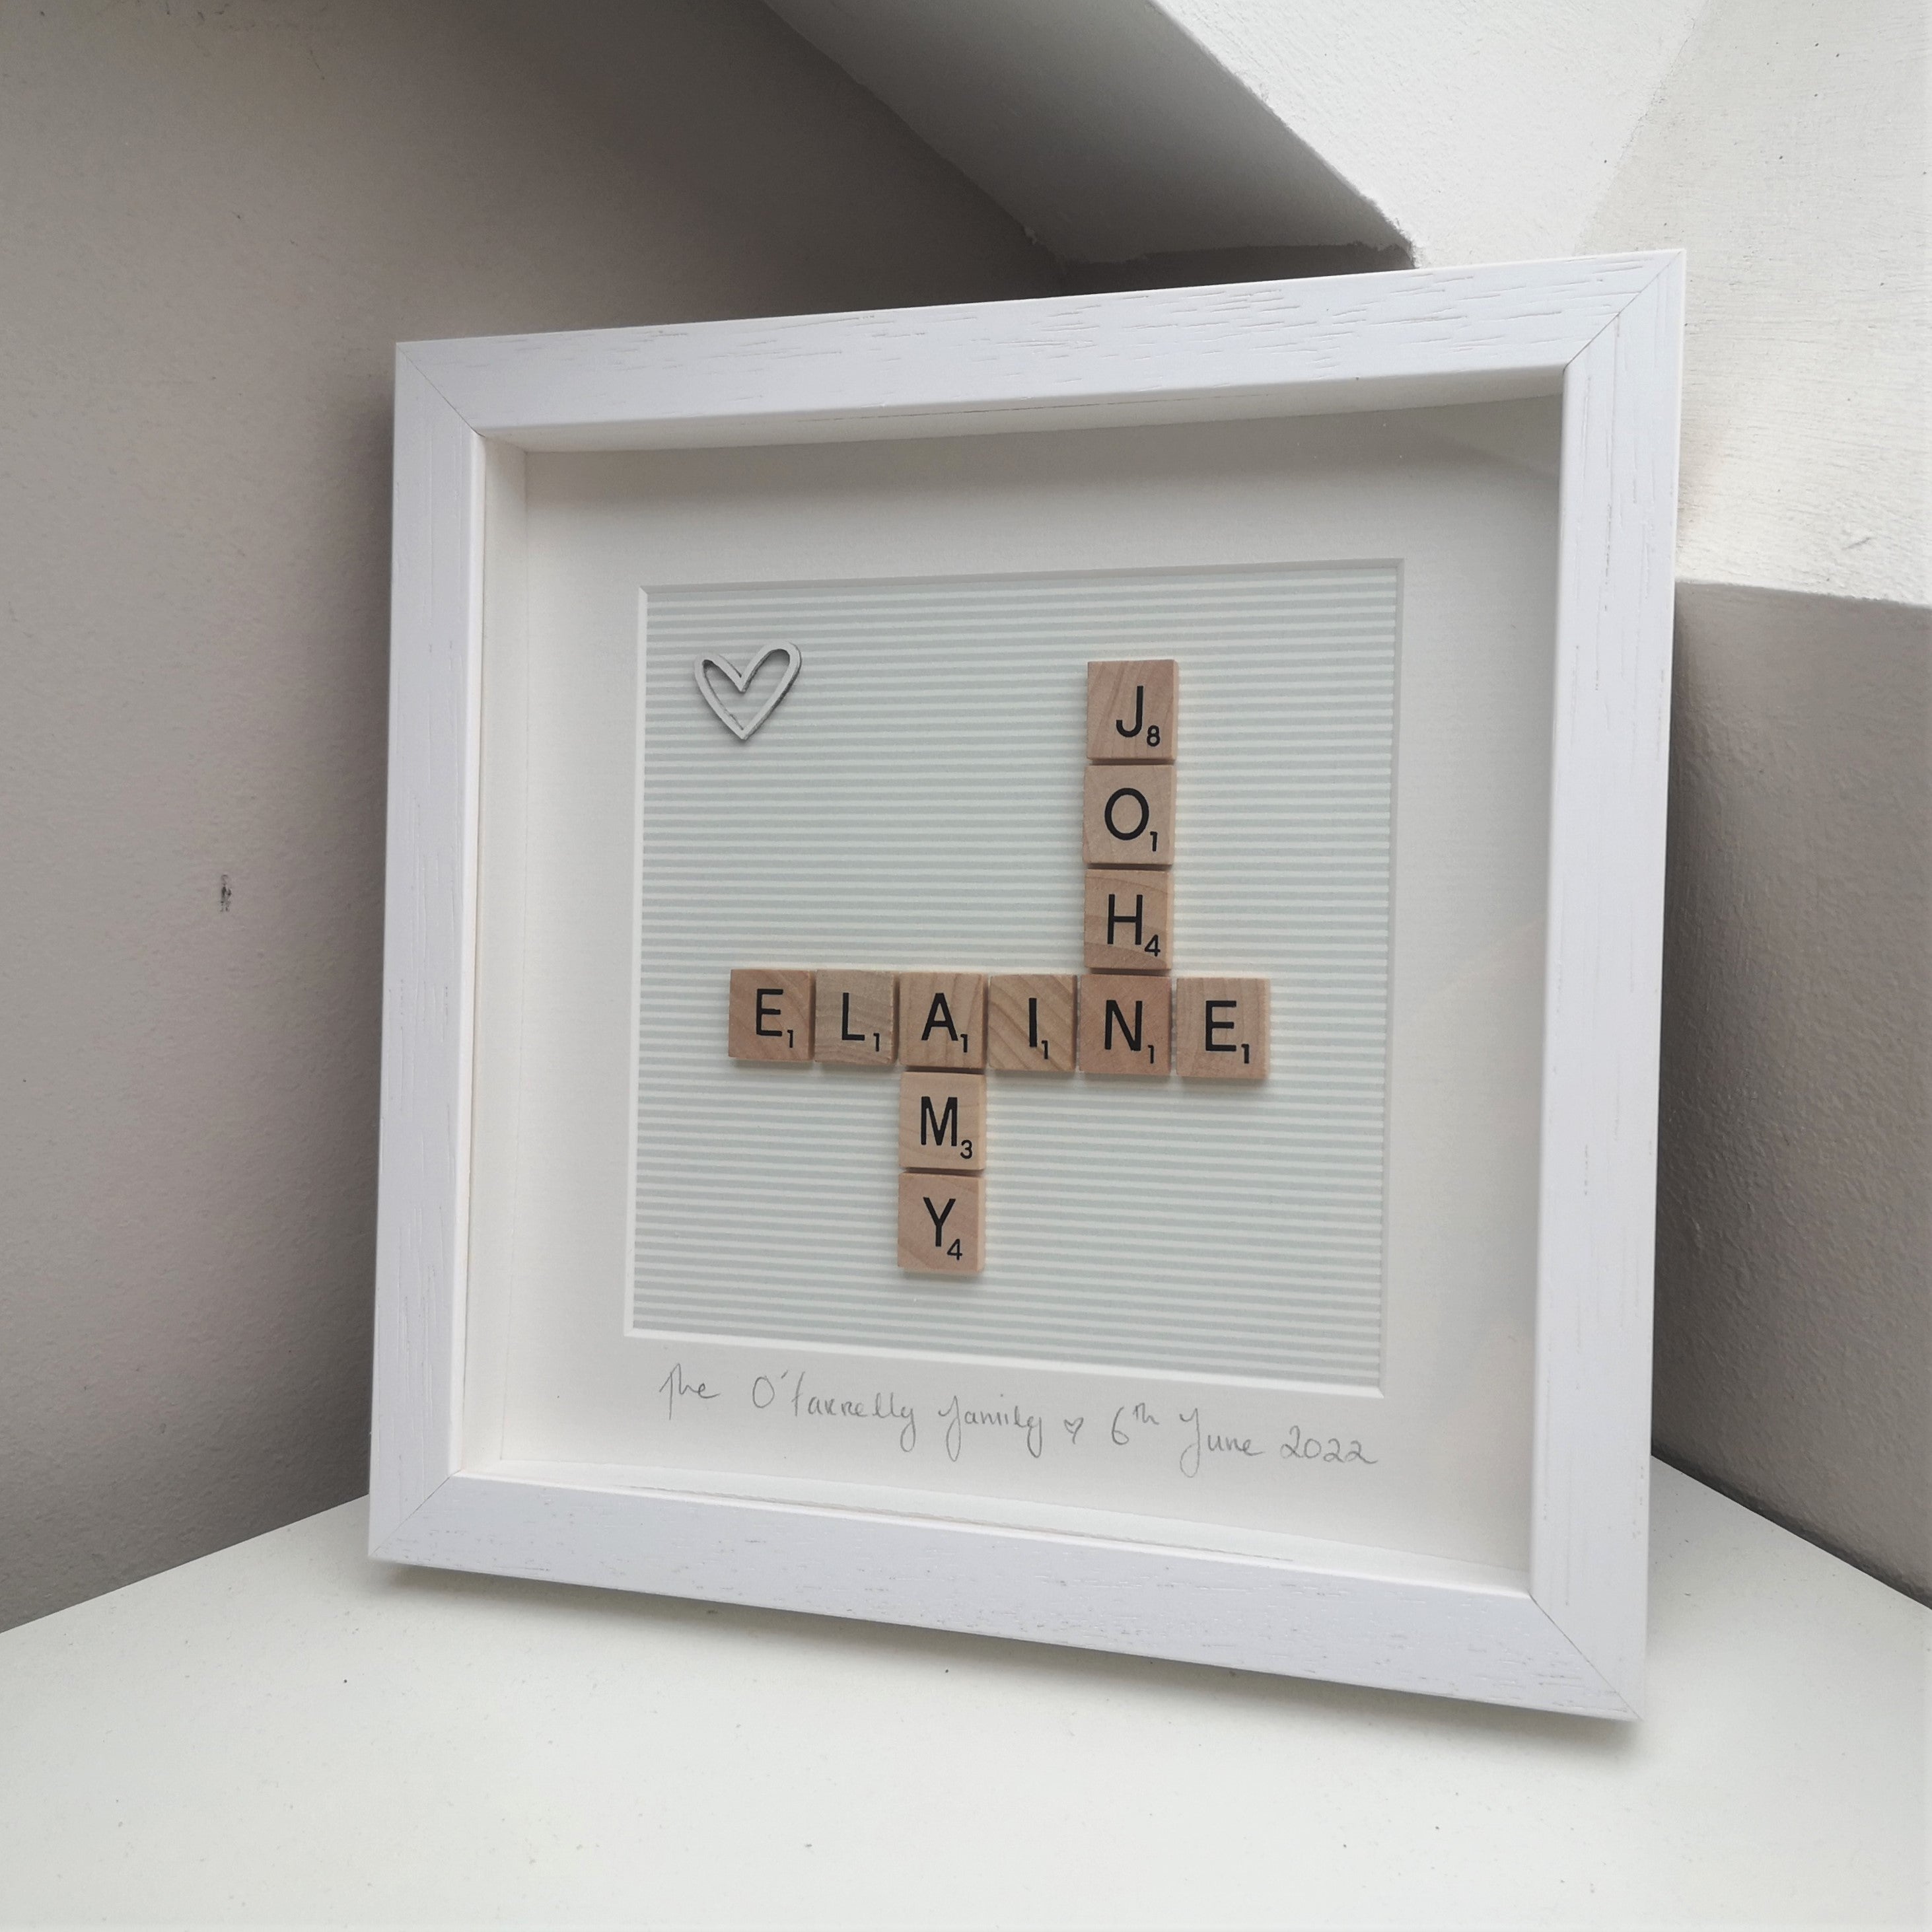 Personalised Couples Scrabble name frame with wooden white heart in the corner on a striped grey backing